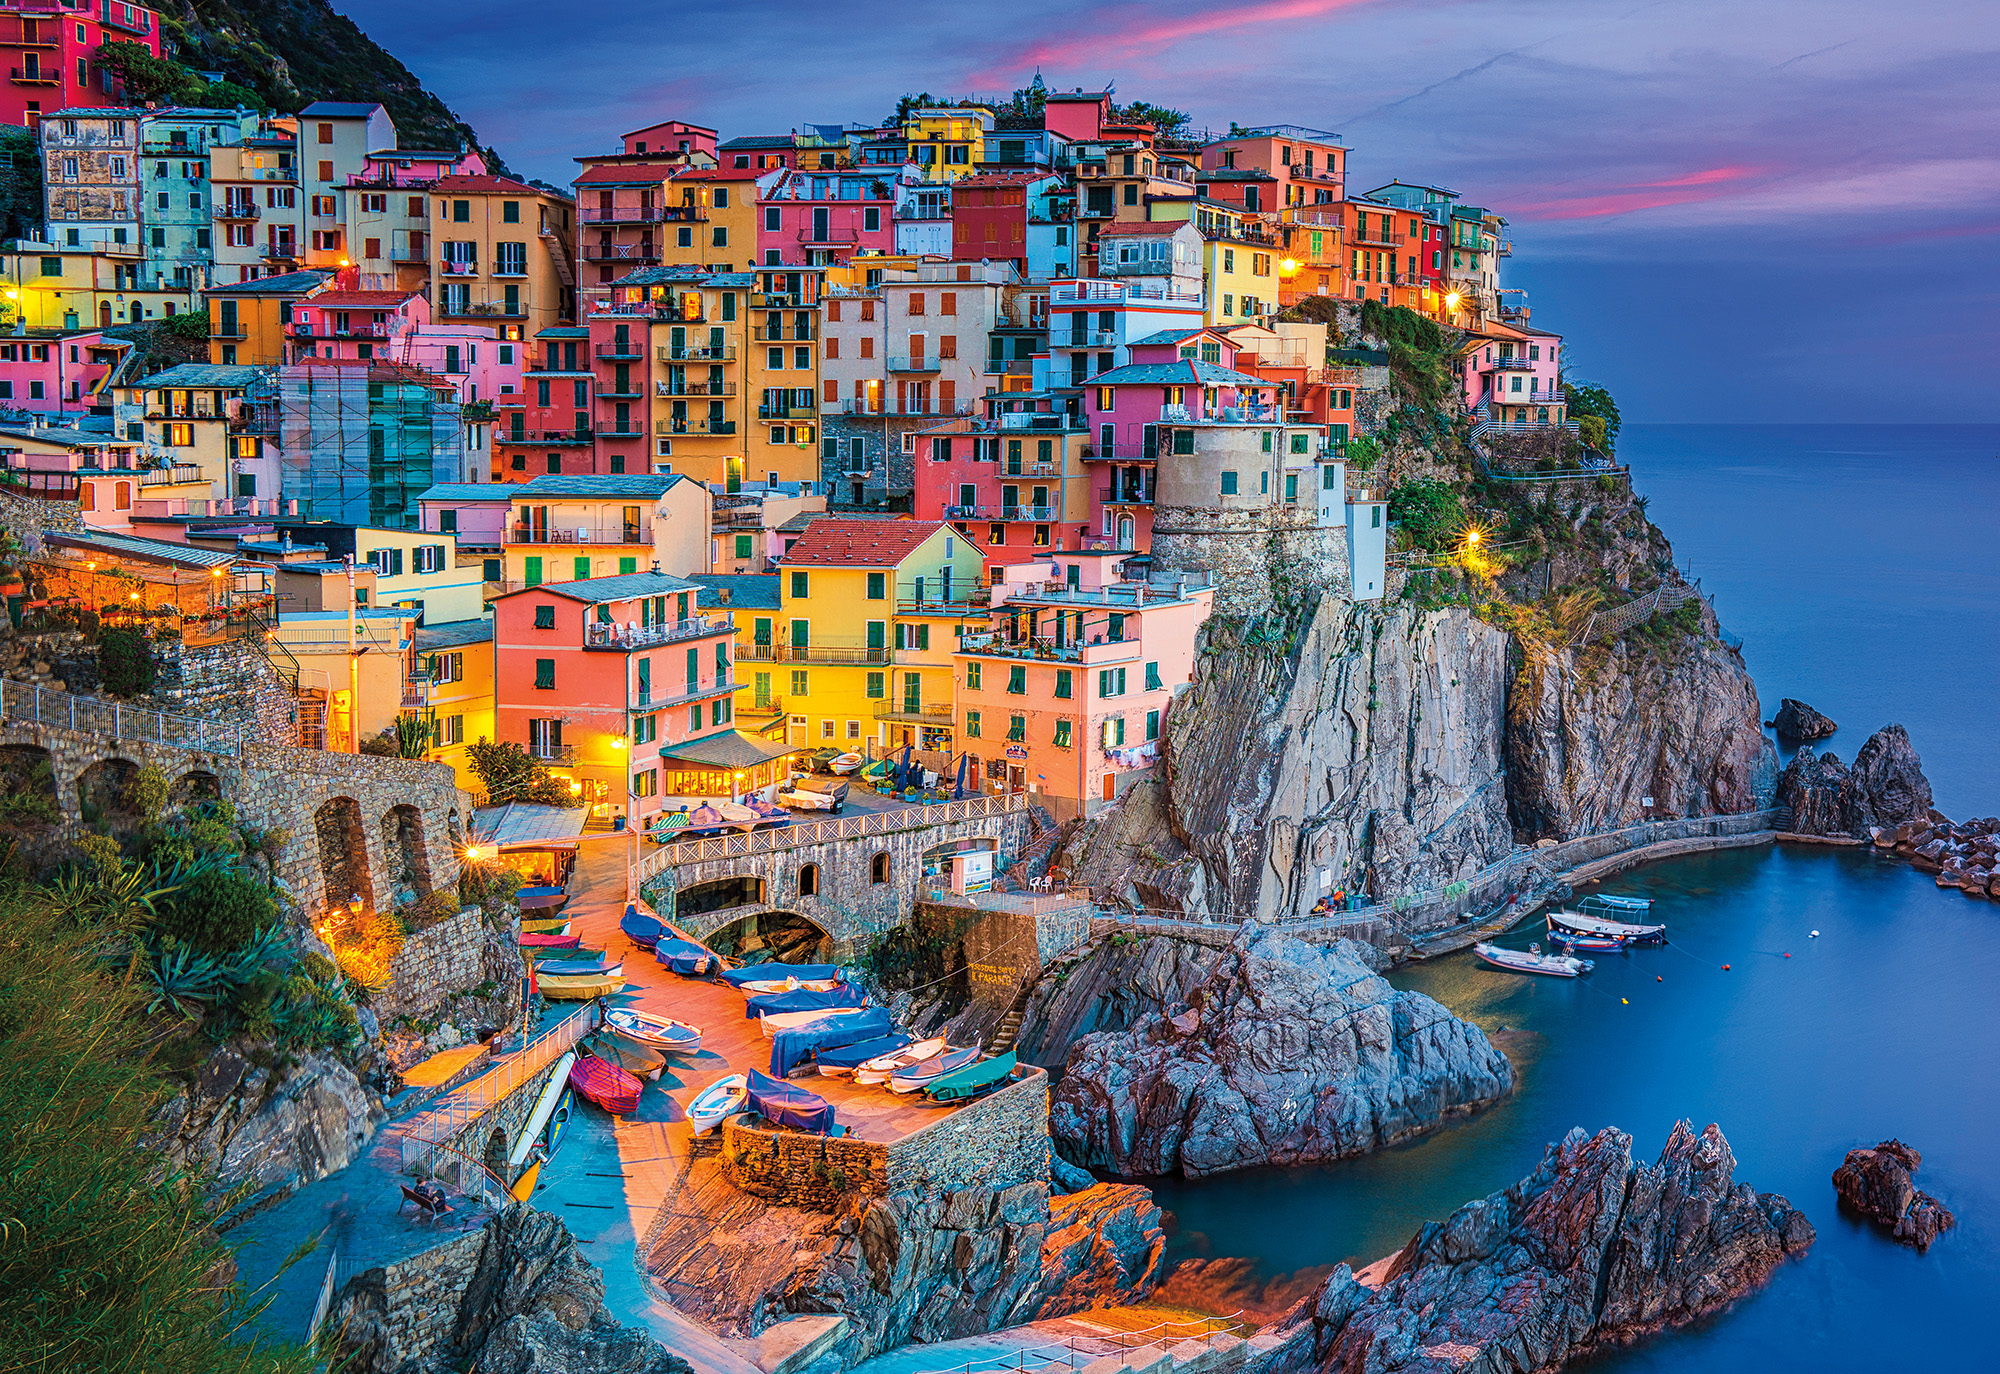 Dusk at Cinque Terre - Scratch and Dent